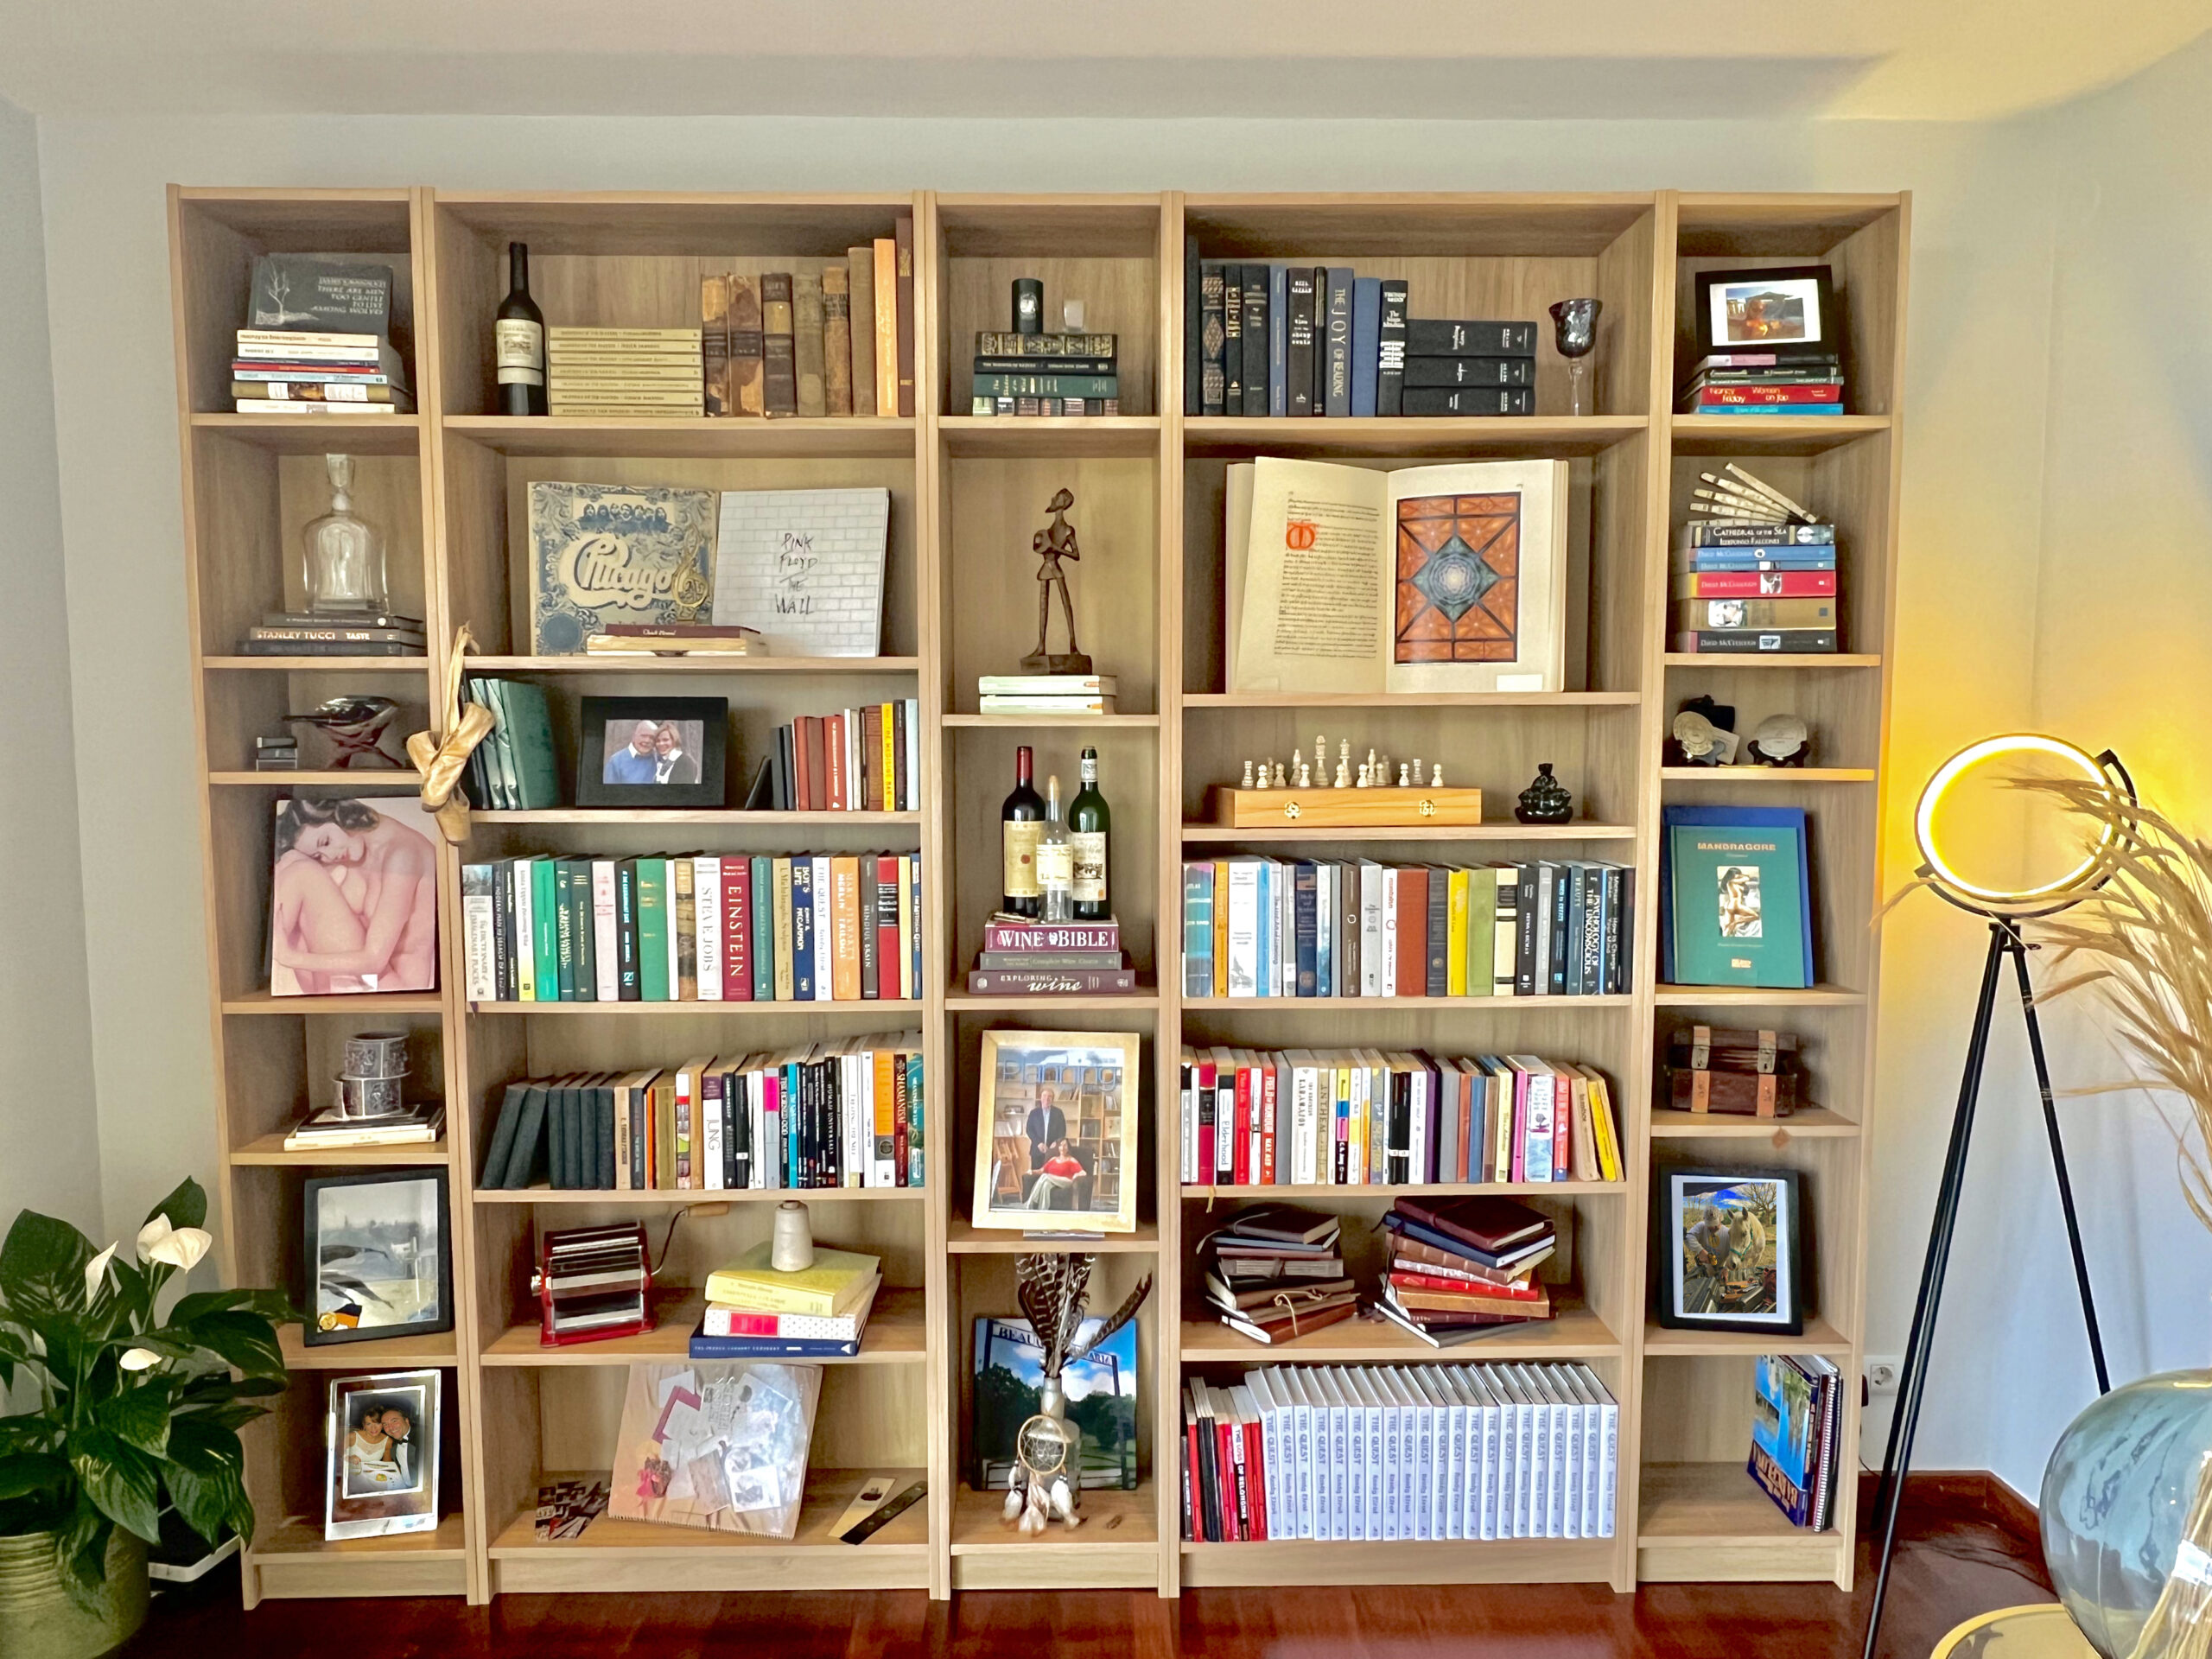 An Intimate Look Into Our Life: The Style of Our Book Shelf